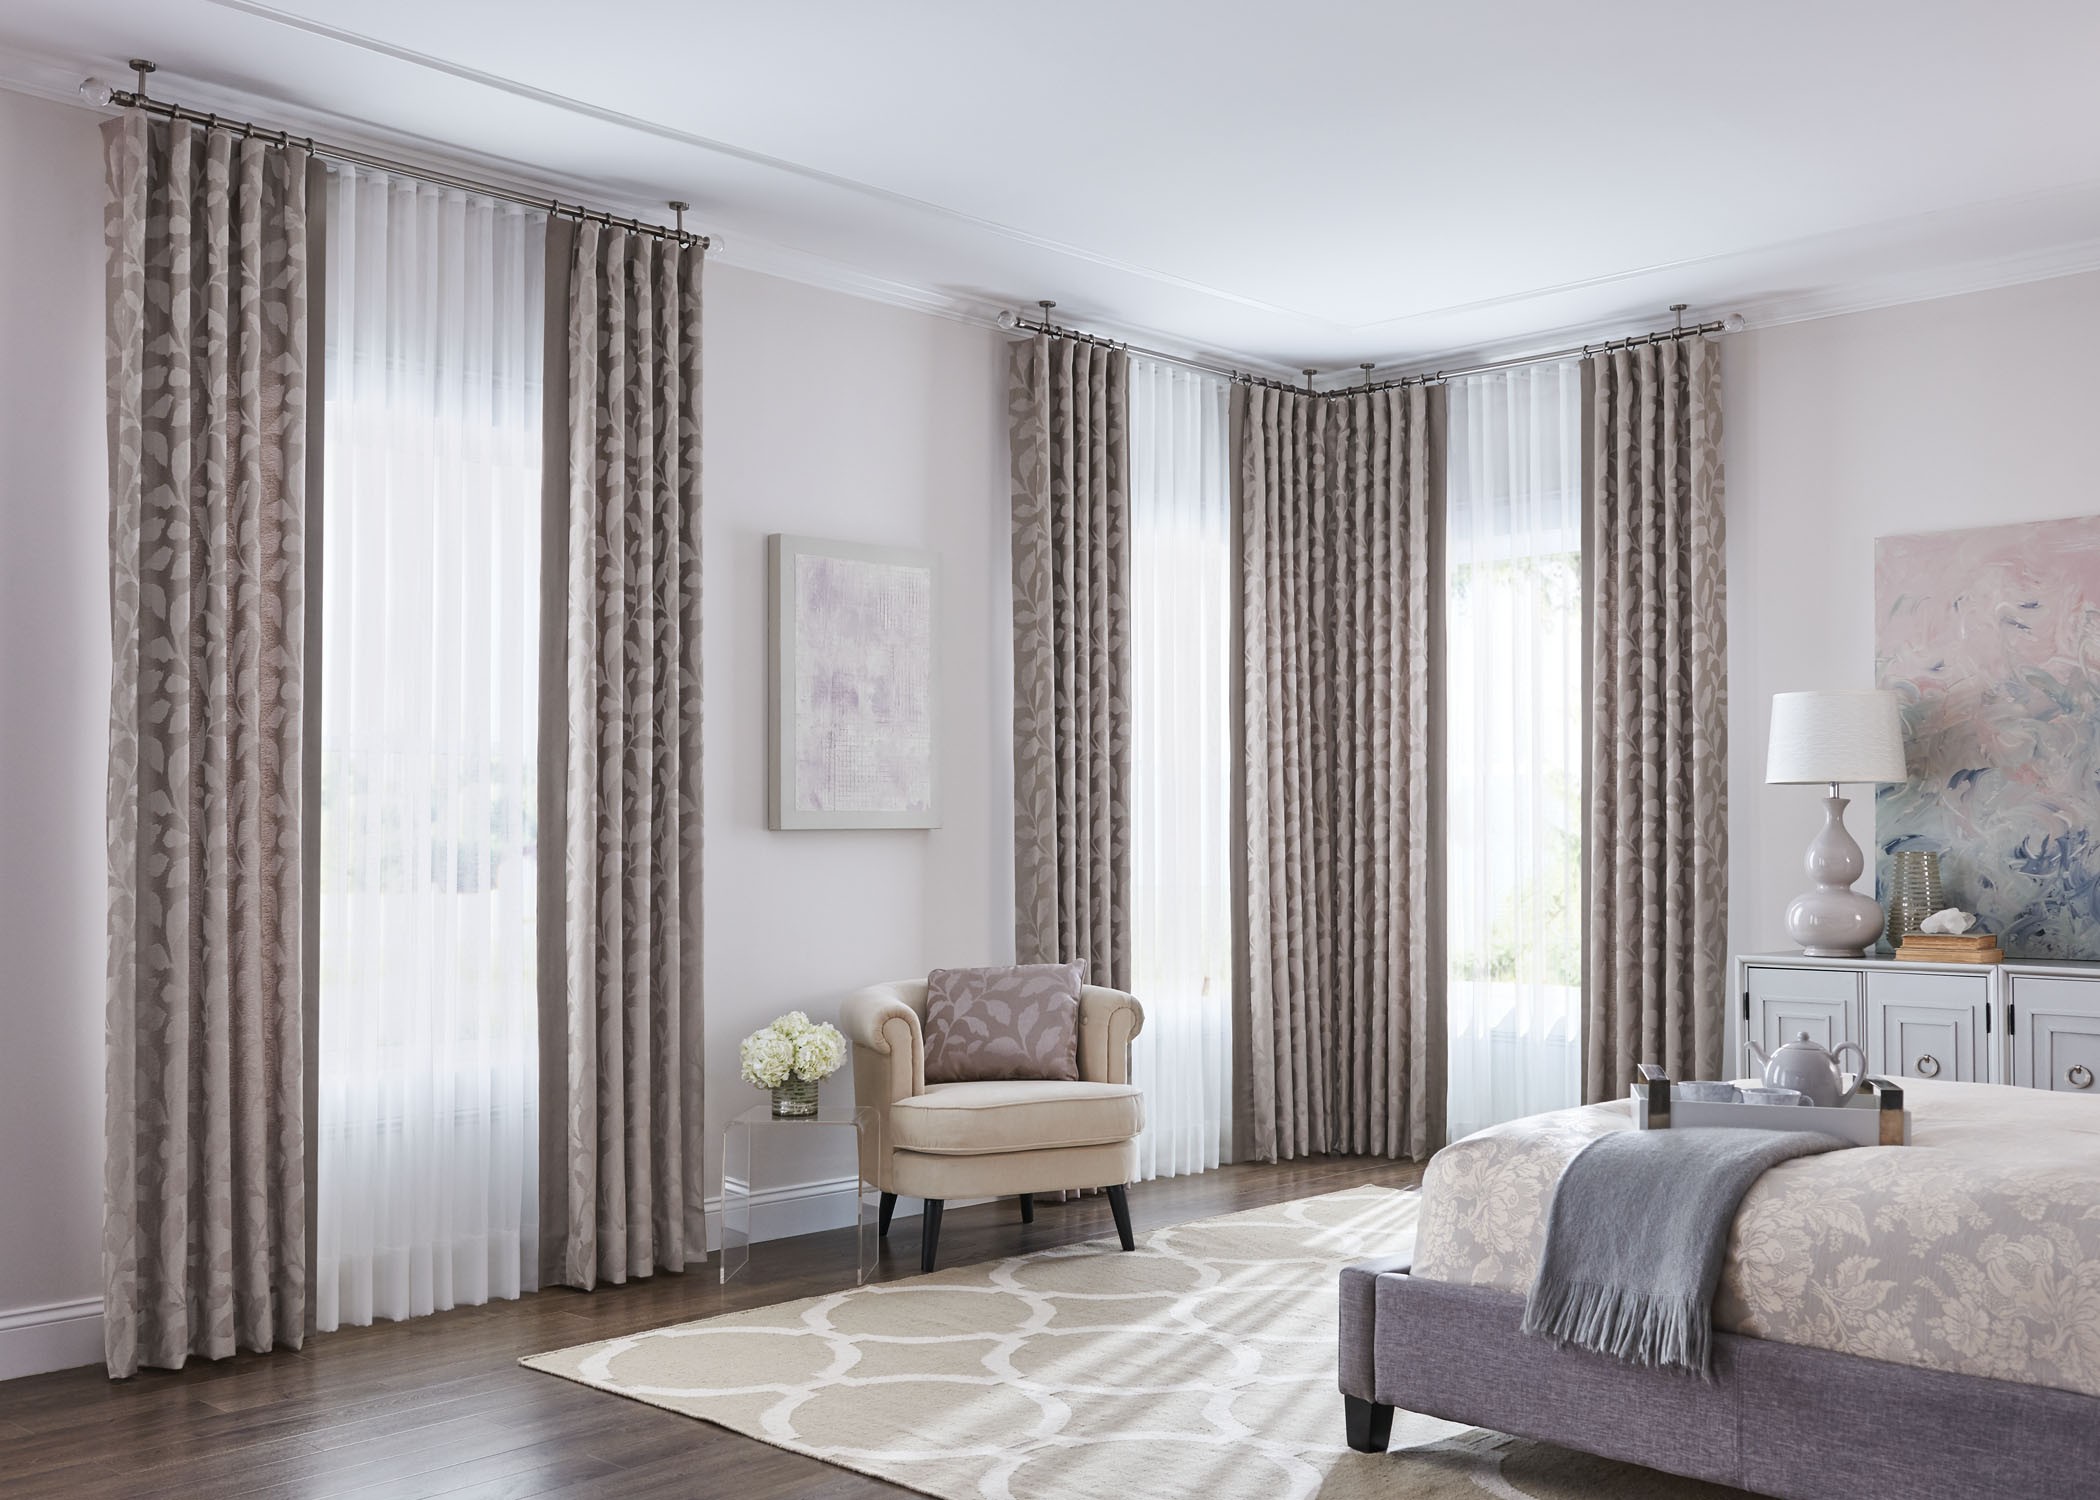 Window Curtains Master Bed - Window Curtains Master Bed - make your room appear larger, provide privacy and help with heating and cooling cost